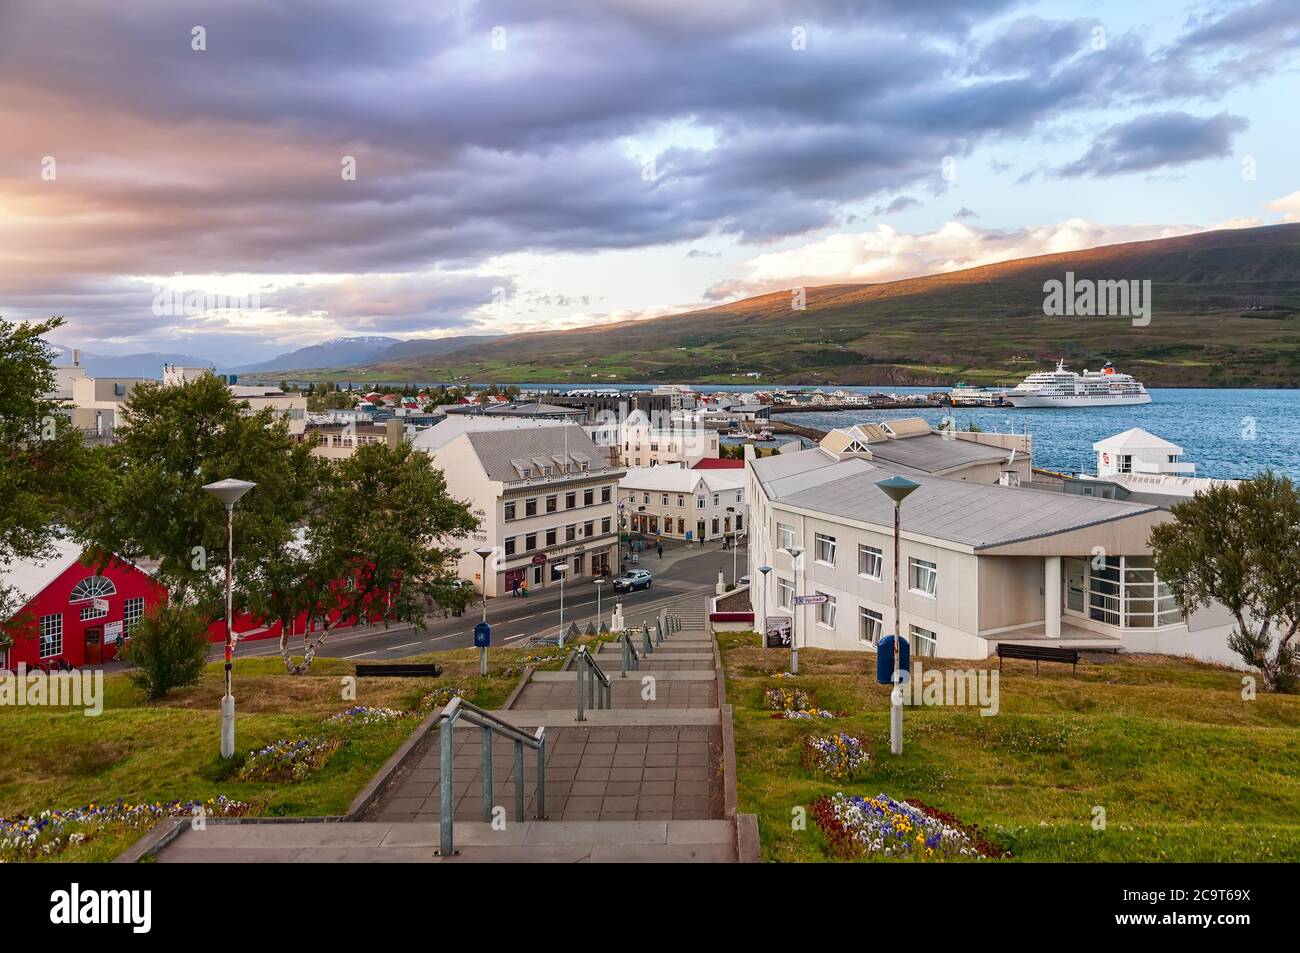 Akureyri, Iceland - August 8, 2012: Dramatic sky over Akureyri center at dusk. Akureyri, called the Capital of North Iceland, is an important port Stock Photo